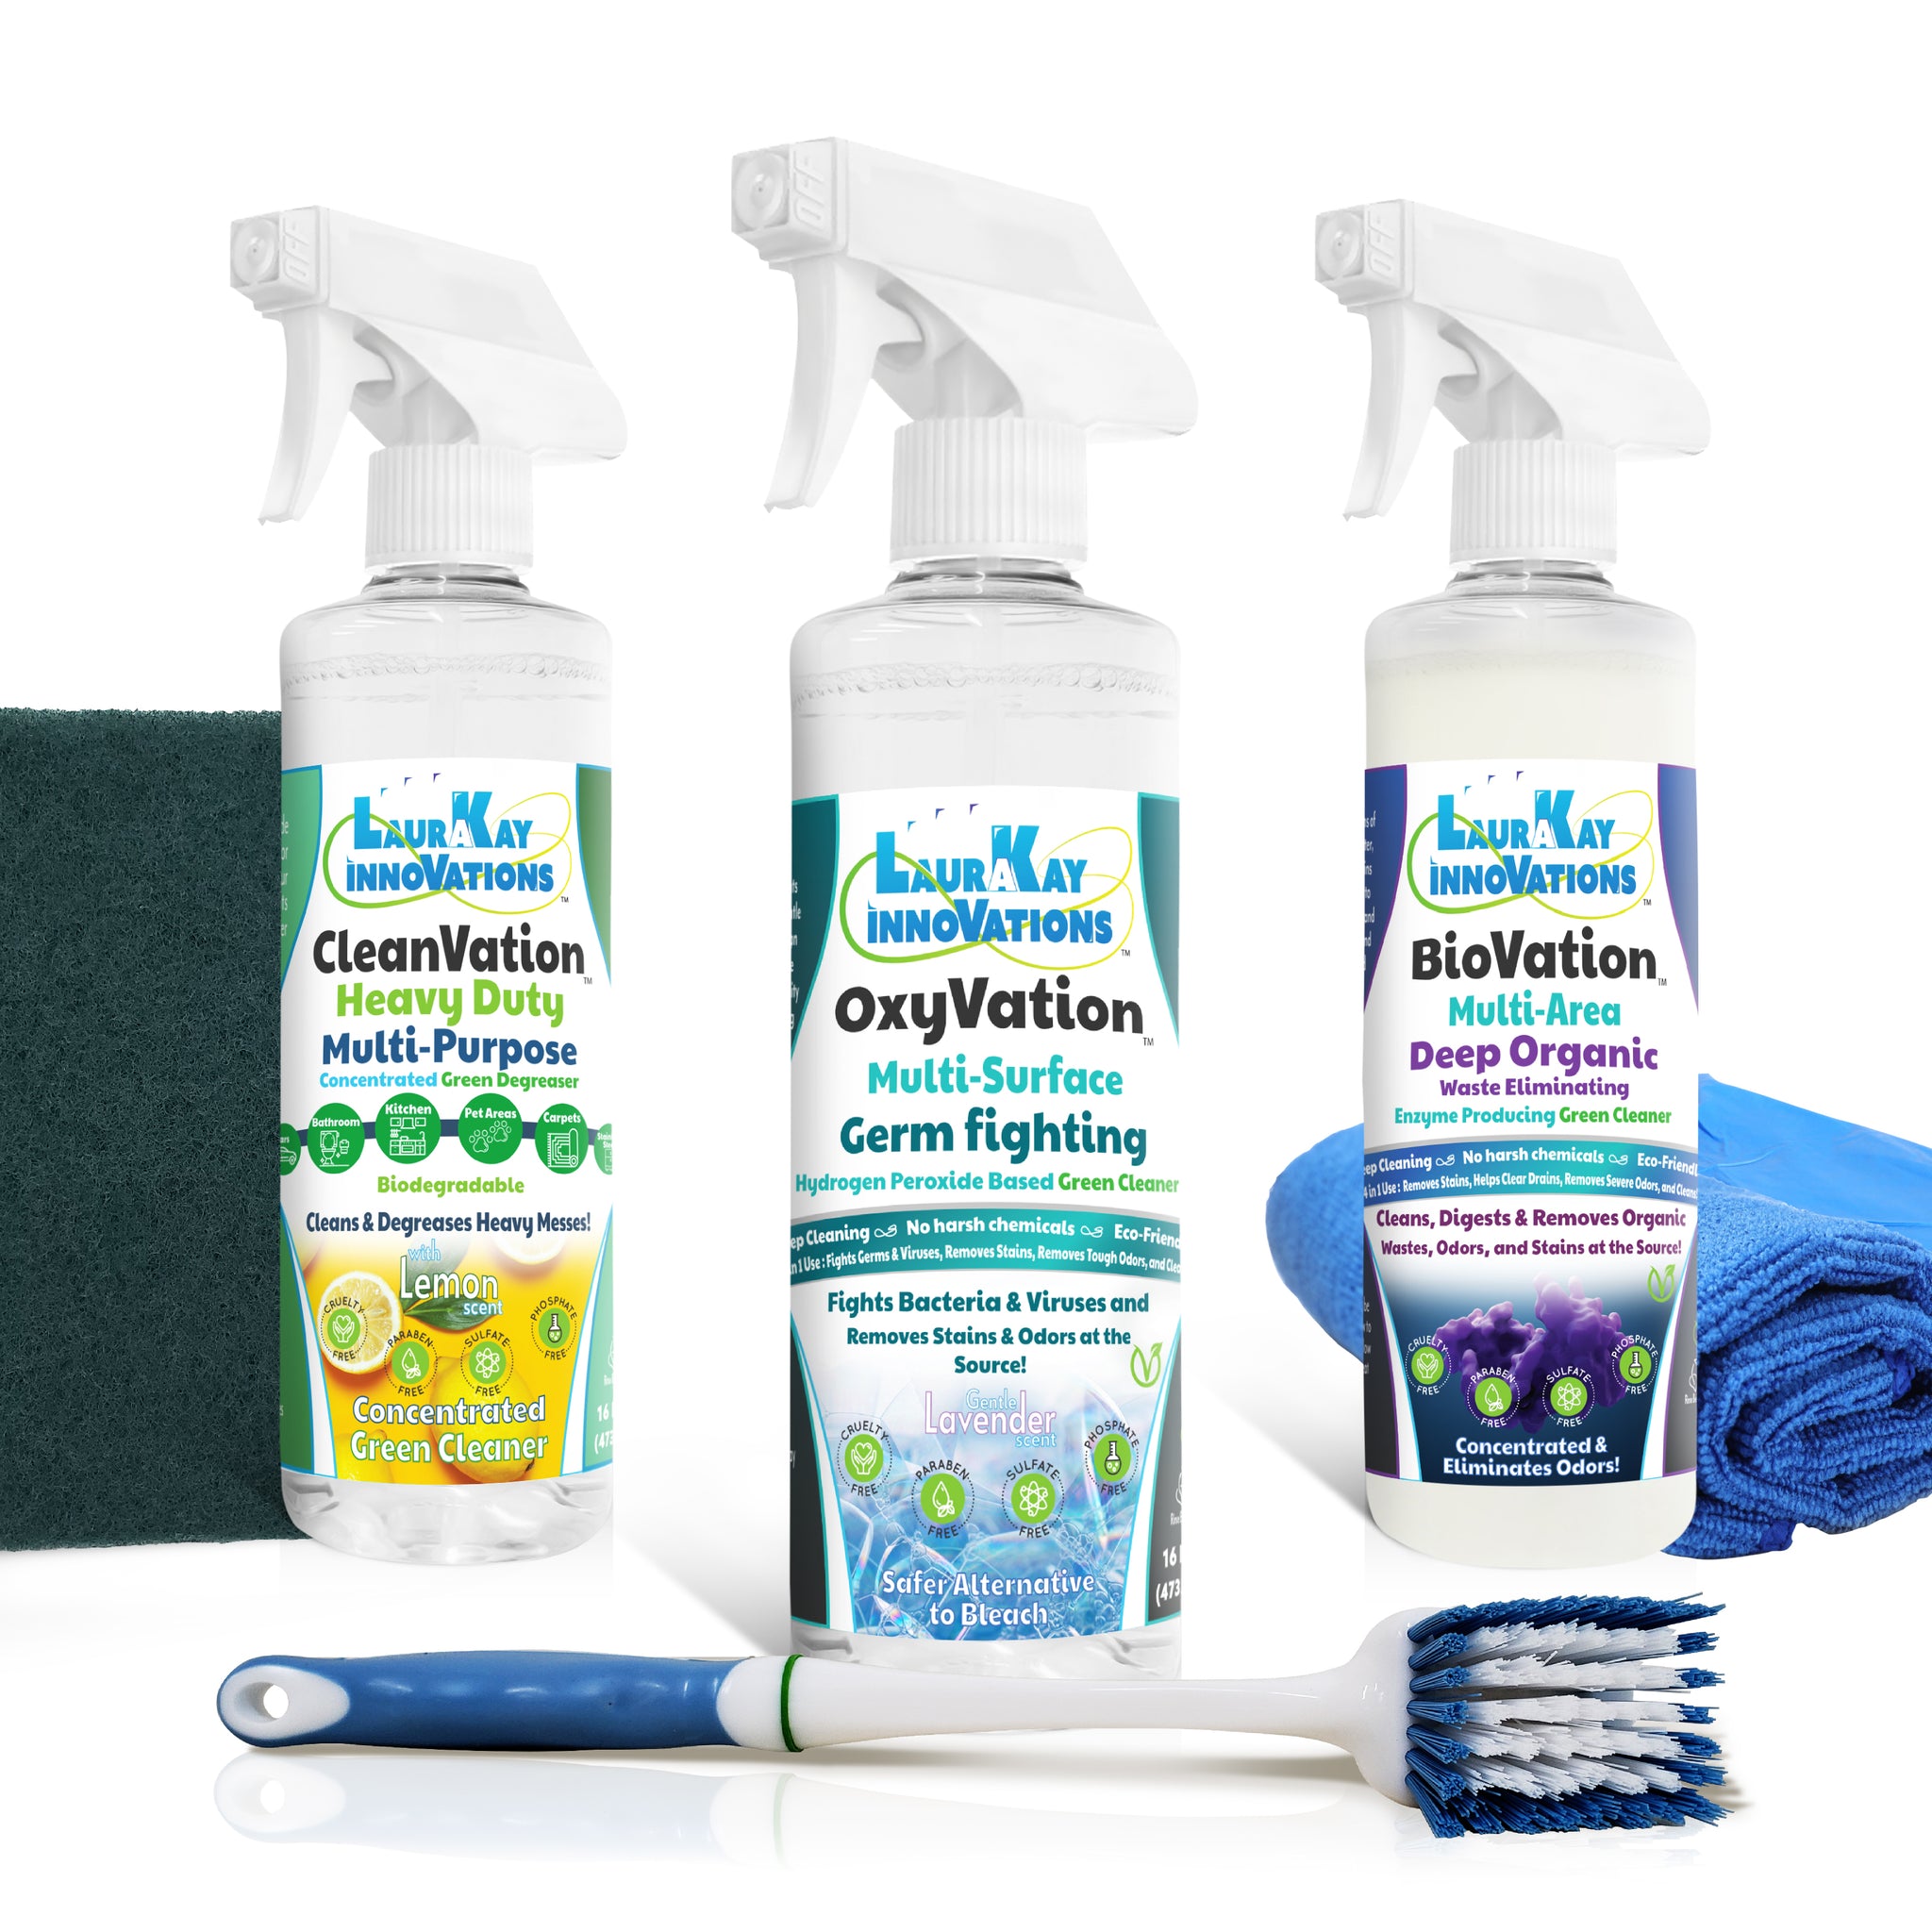 CleanVation Clean-Up Kit Multi-Purpose Heavy Duty Cleaning, Stain and Odor Removal Kit